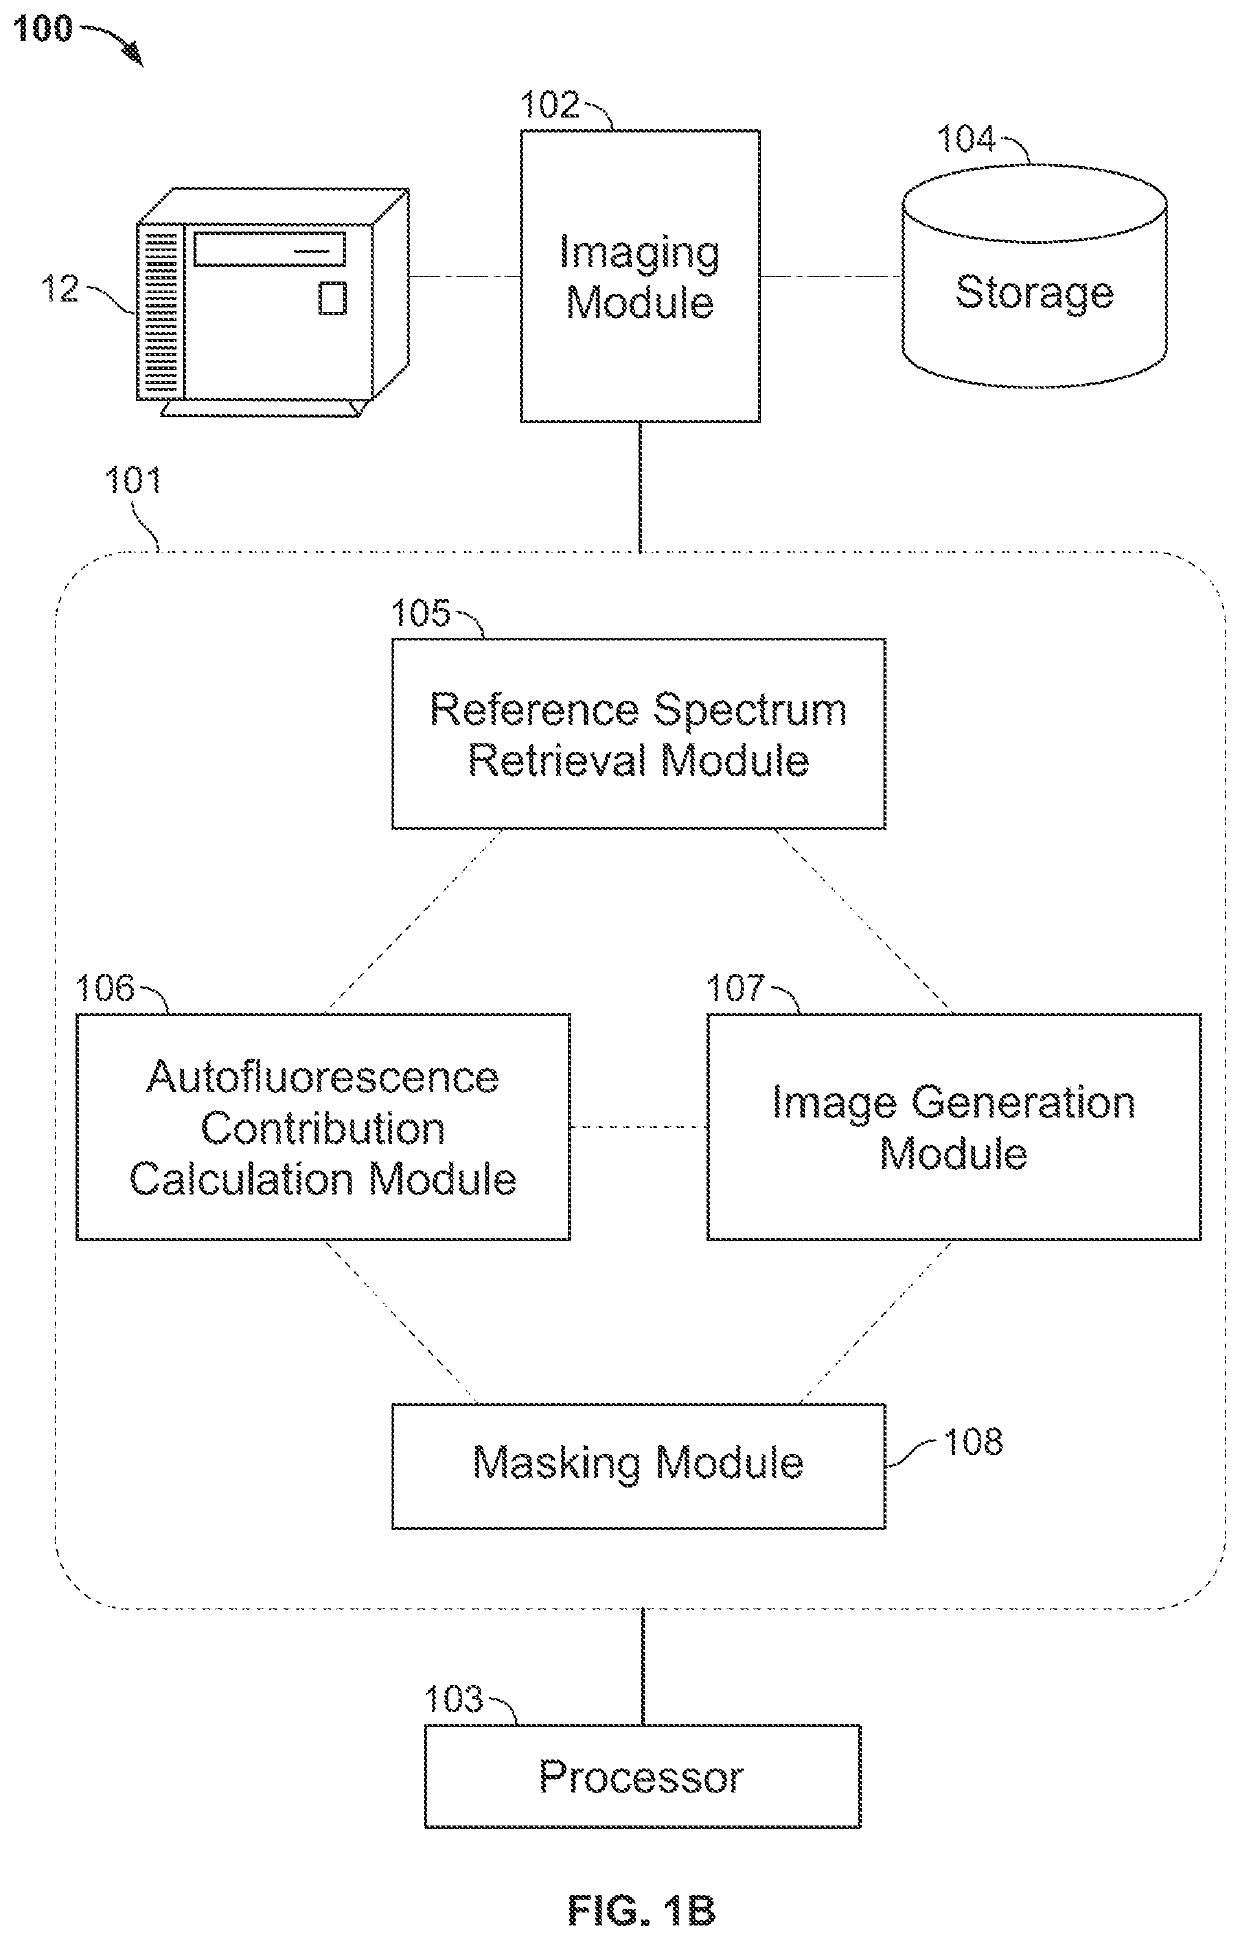 Systems and methods for computing the contributions of autofluorescence in multichannel image